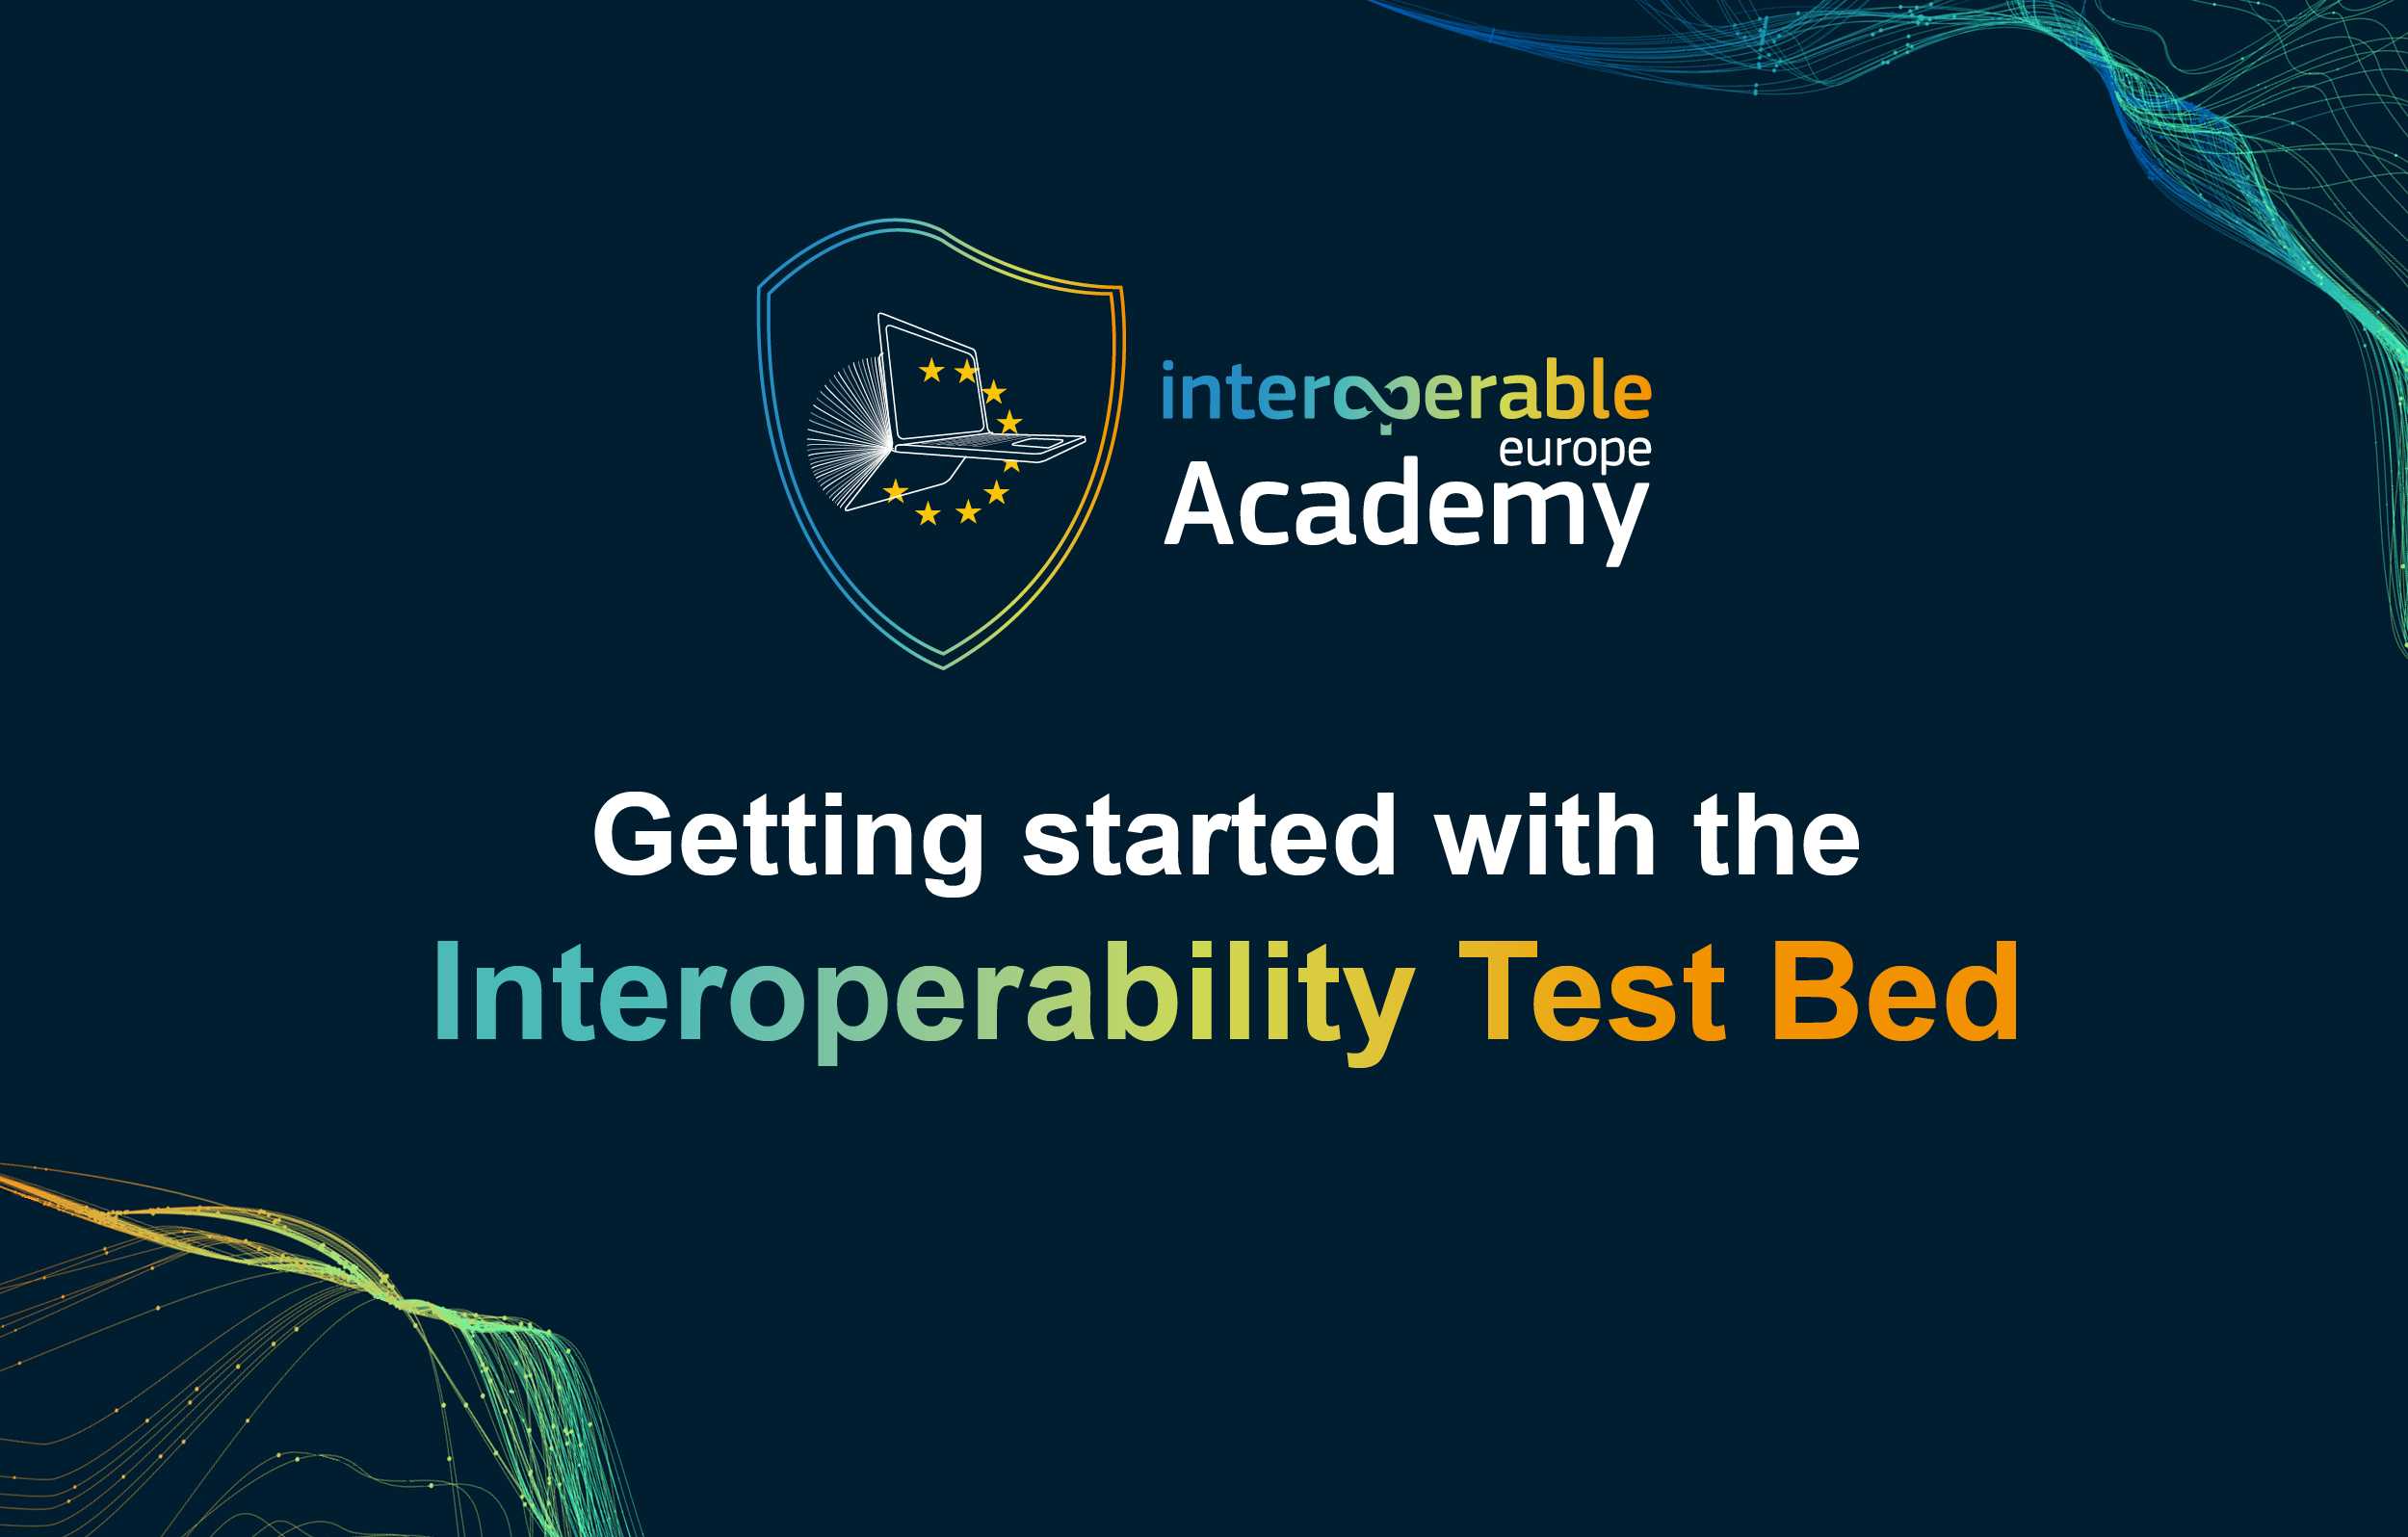 Getting started with the Interoperability Test Bed